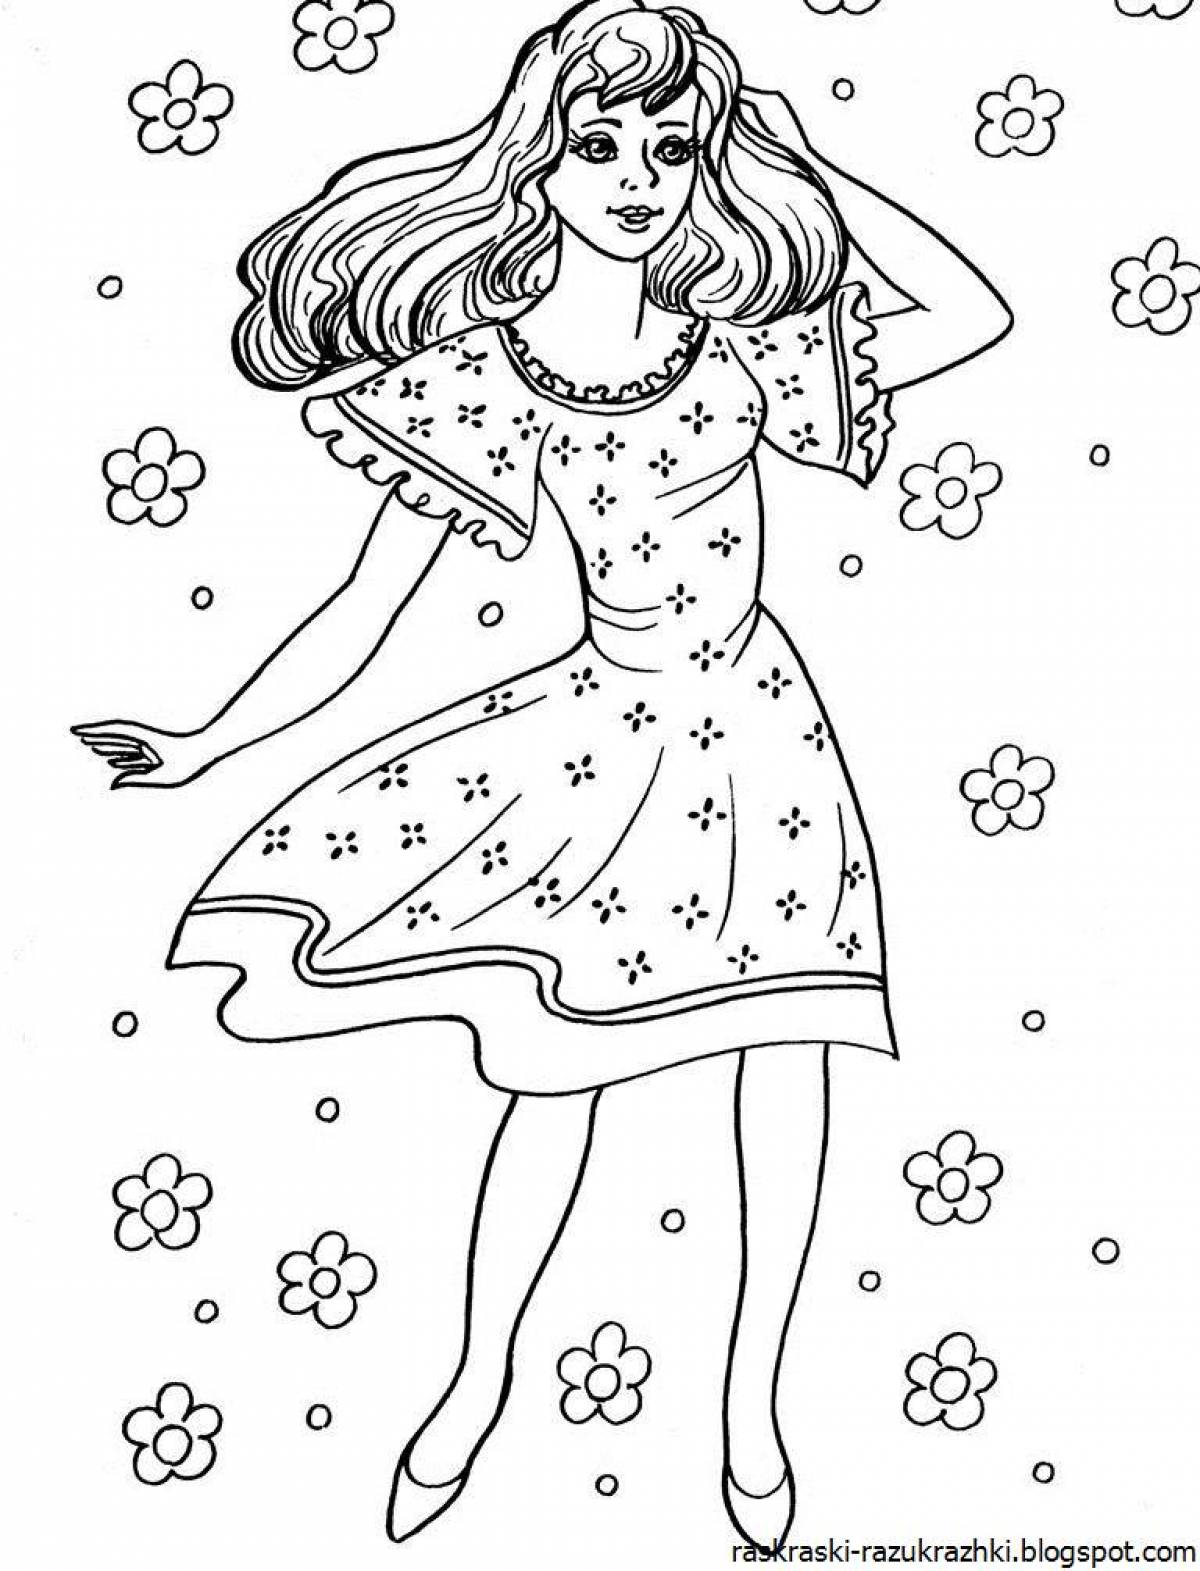 Trendy girly coloring book